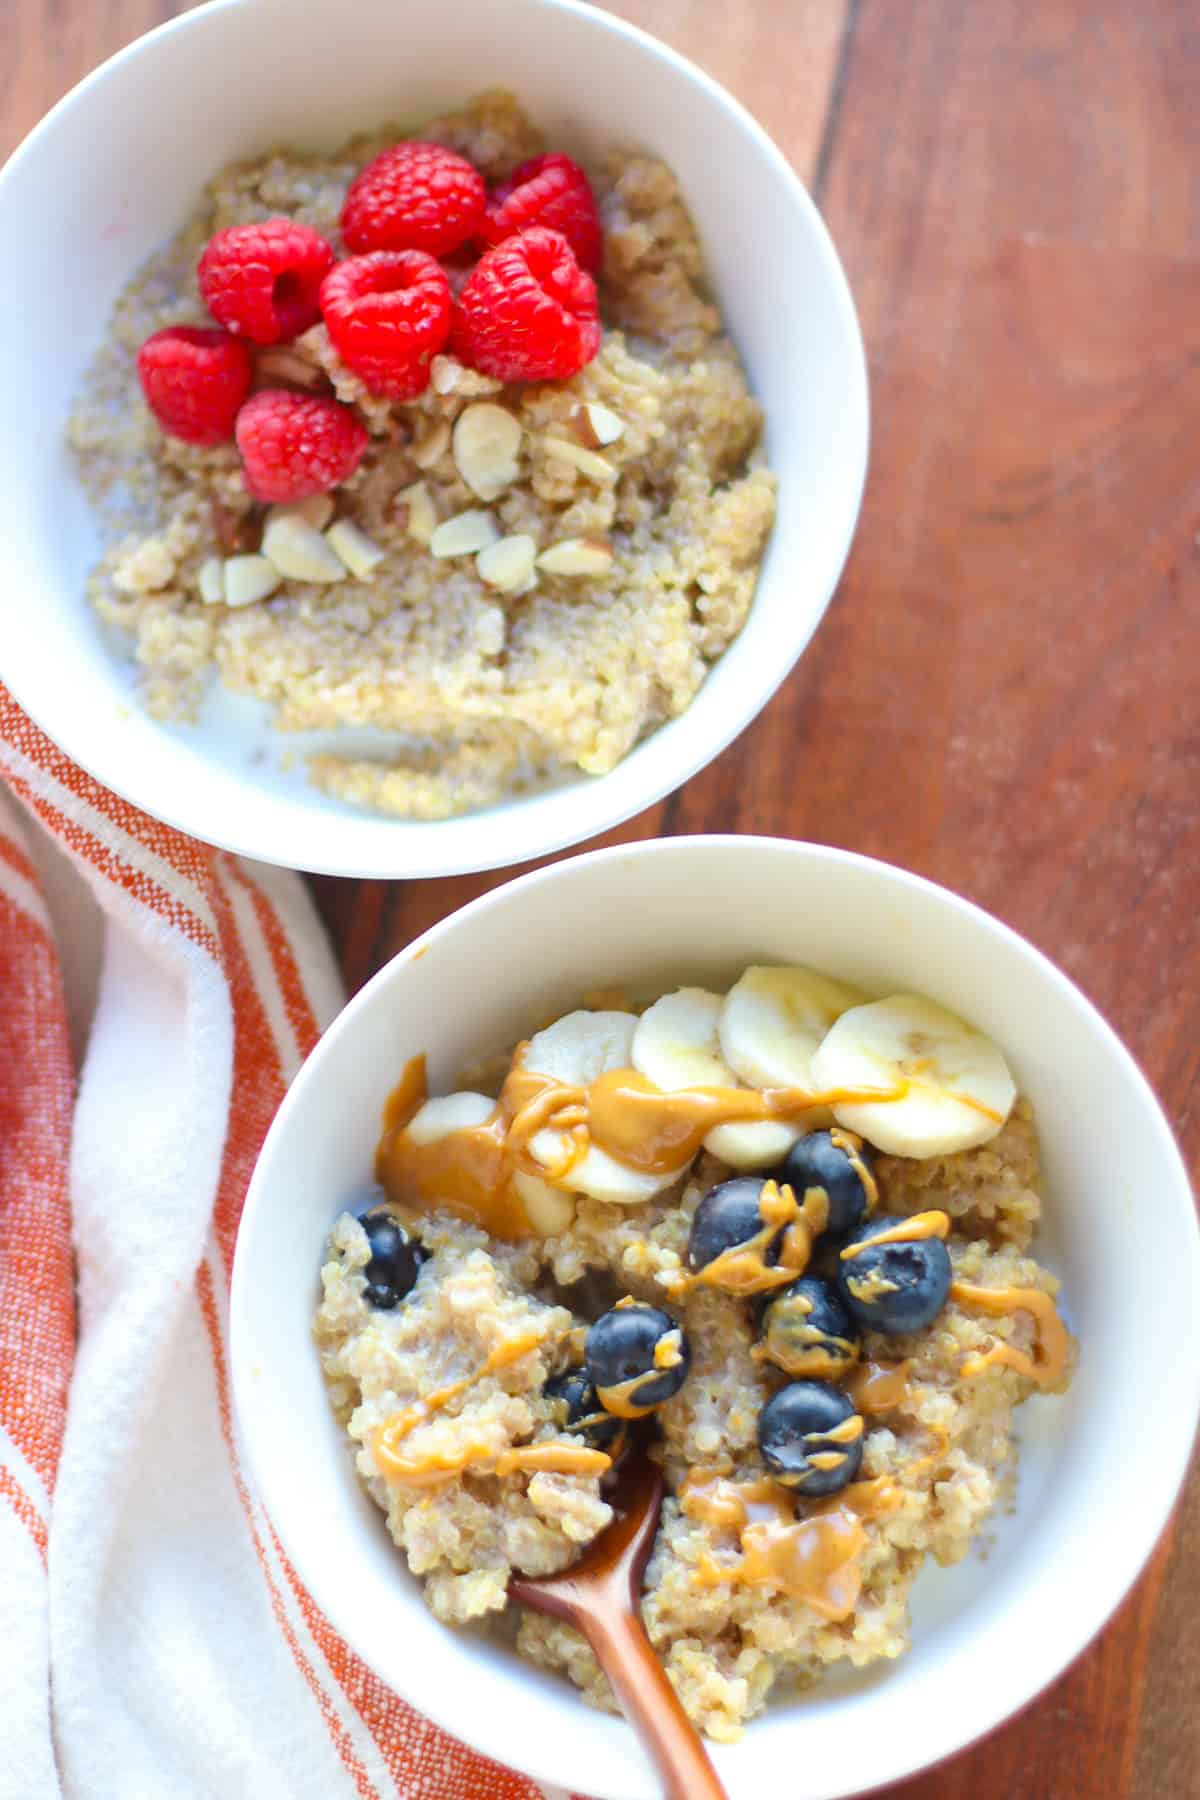 Two porridge bowls with berries and peanut butter drizzle.